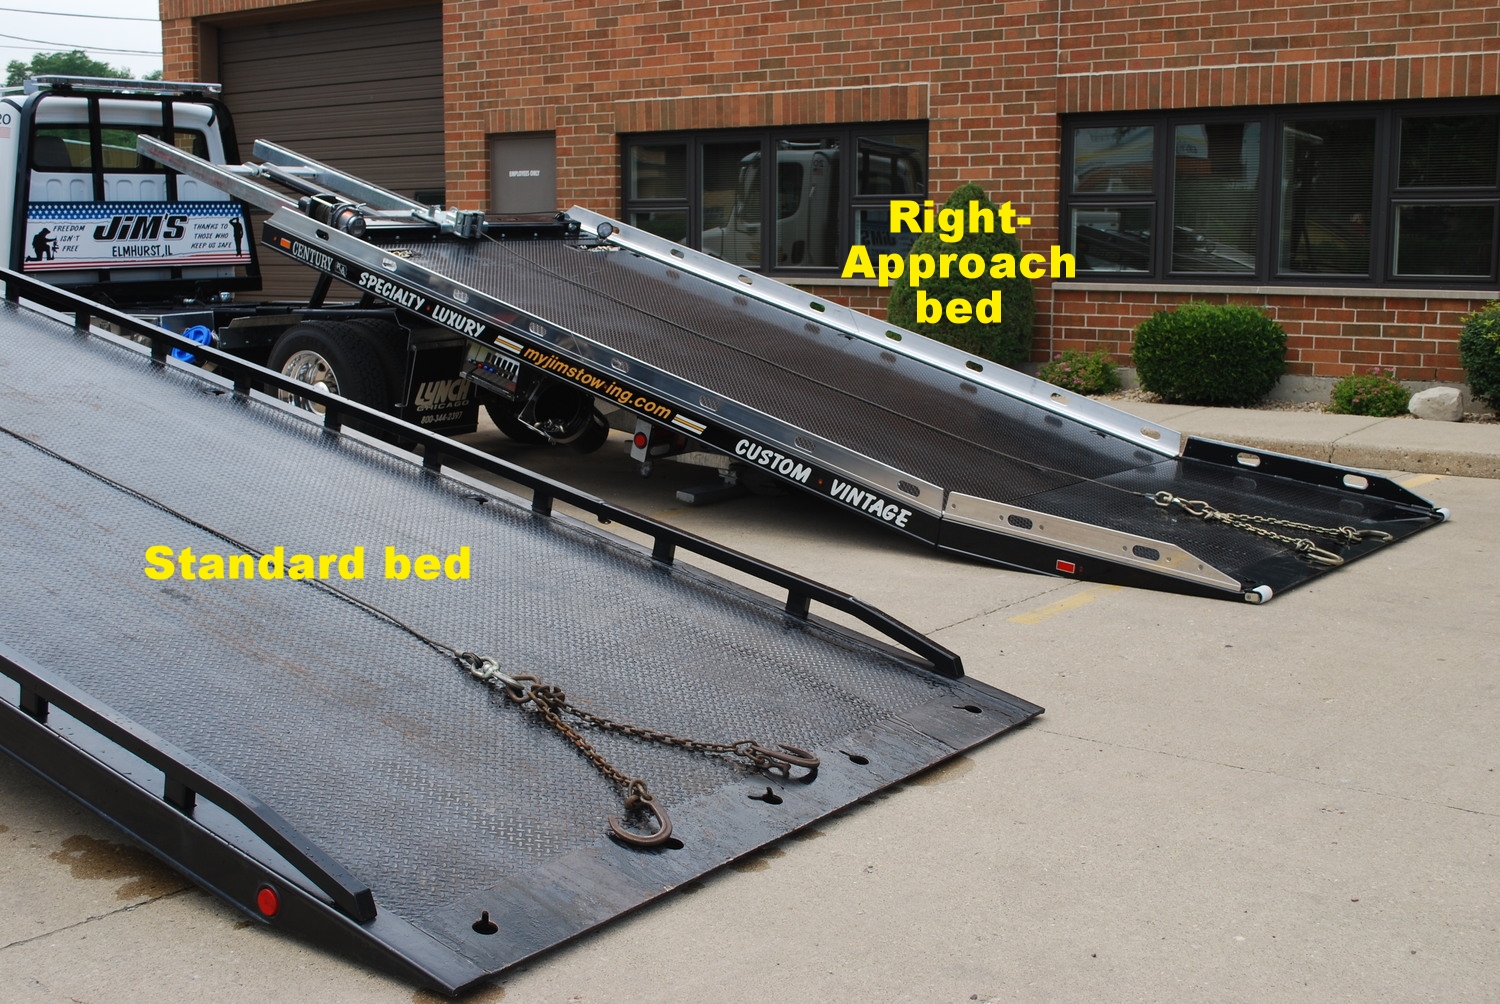 LEFT: Standard flatbed. RIGHT: New Right-Approach Bed. We have 4 Right-Approach Beds to handle the new low-profile autos and SUVs.